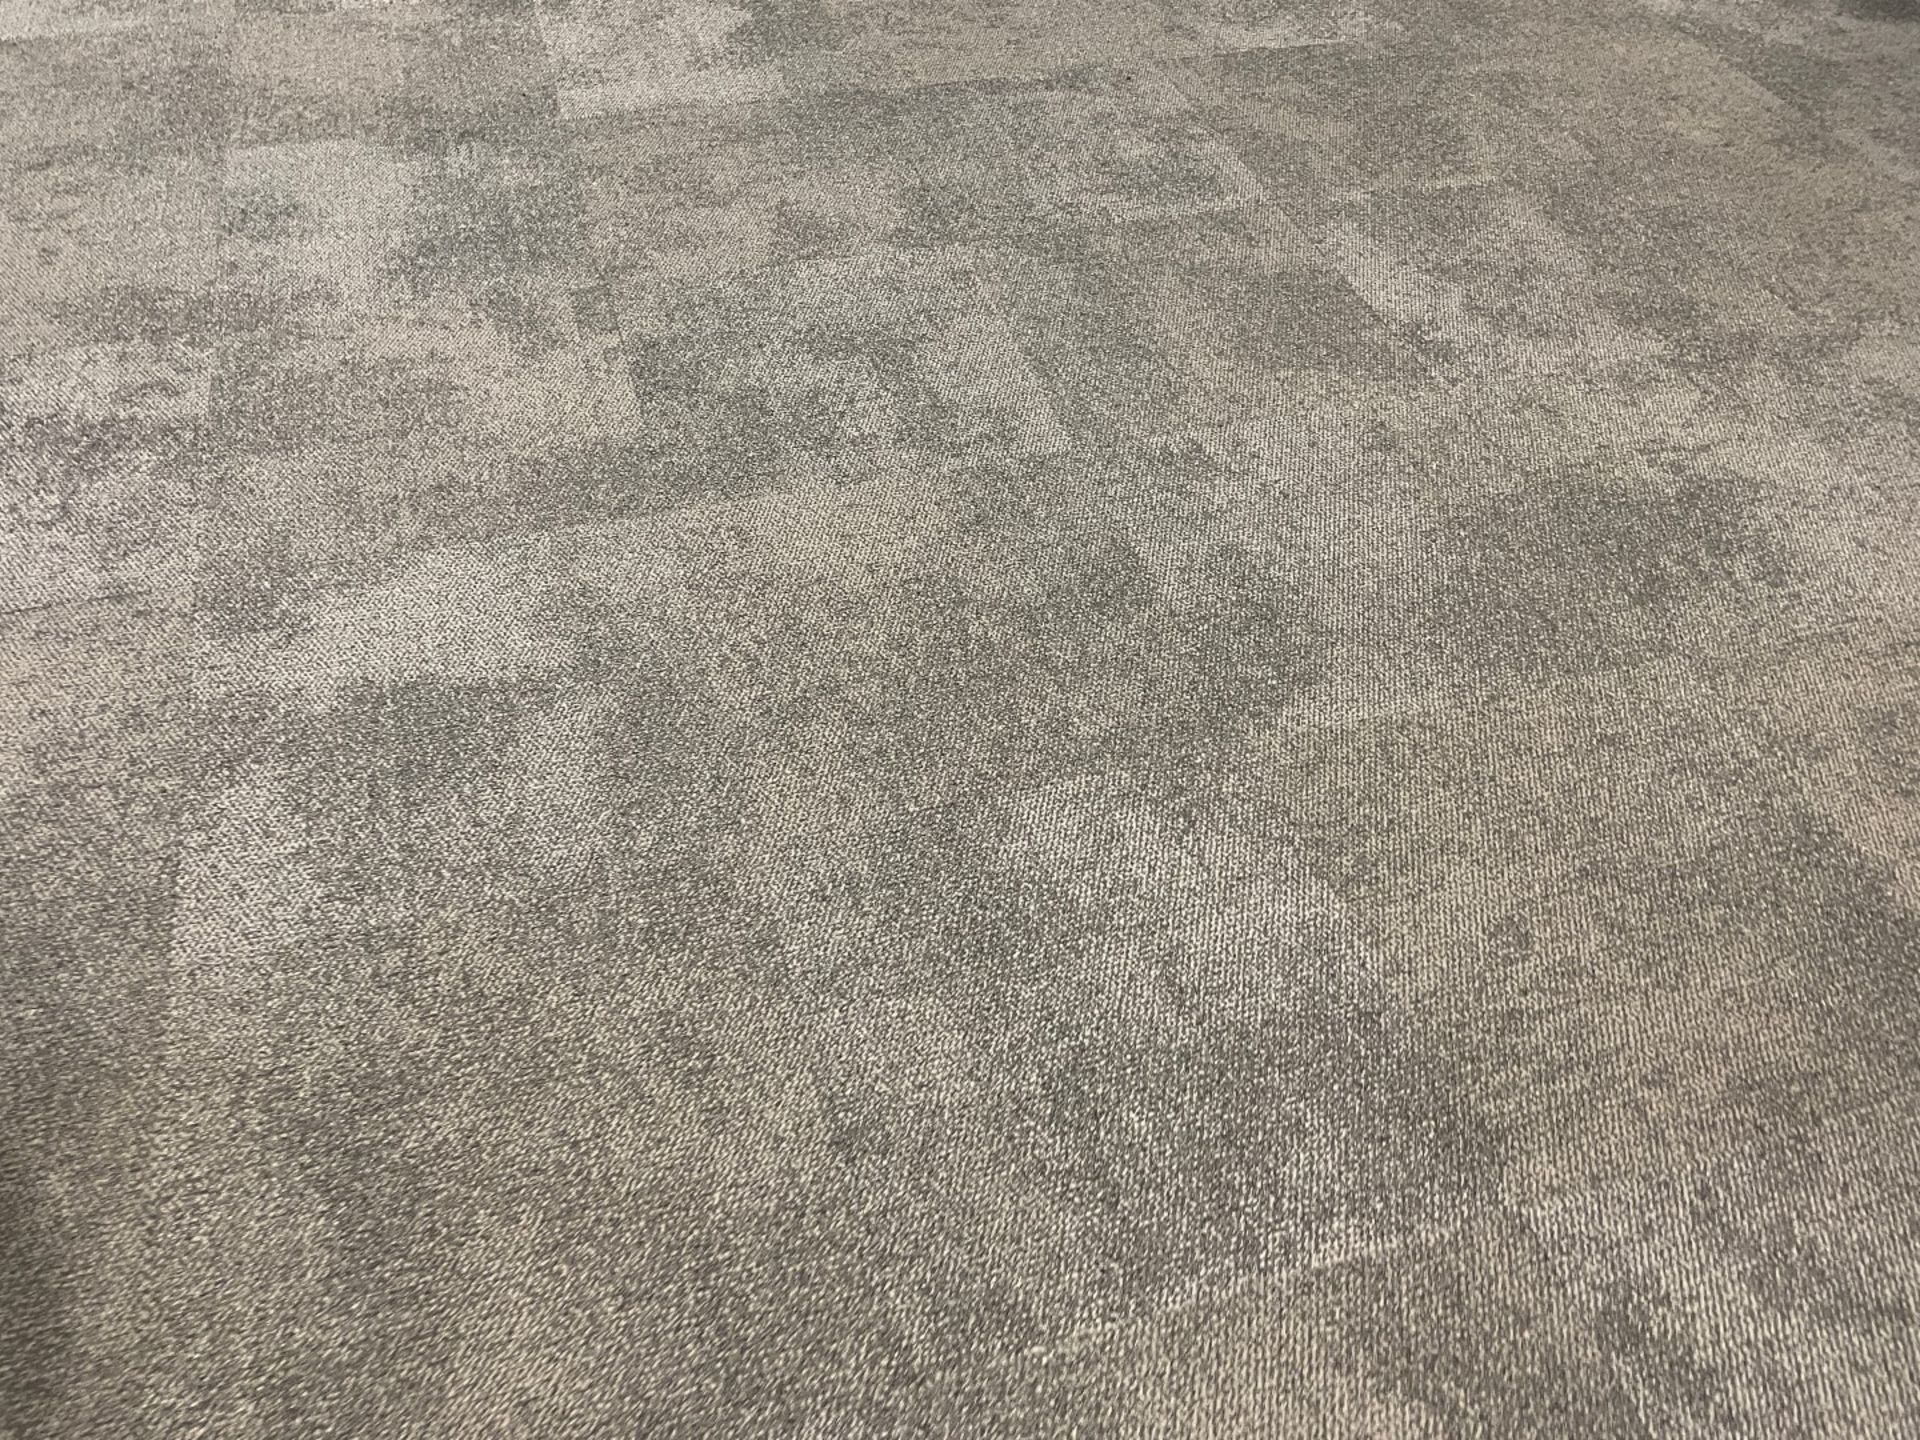 Job Lot Of Approximately 250 x Carpet Tiles - To Be Removed From The 2nd Floor Of An Executive - Image 6 of 10